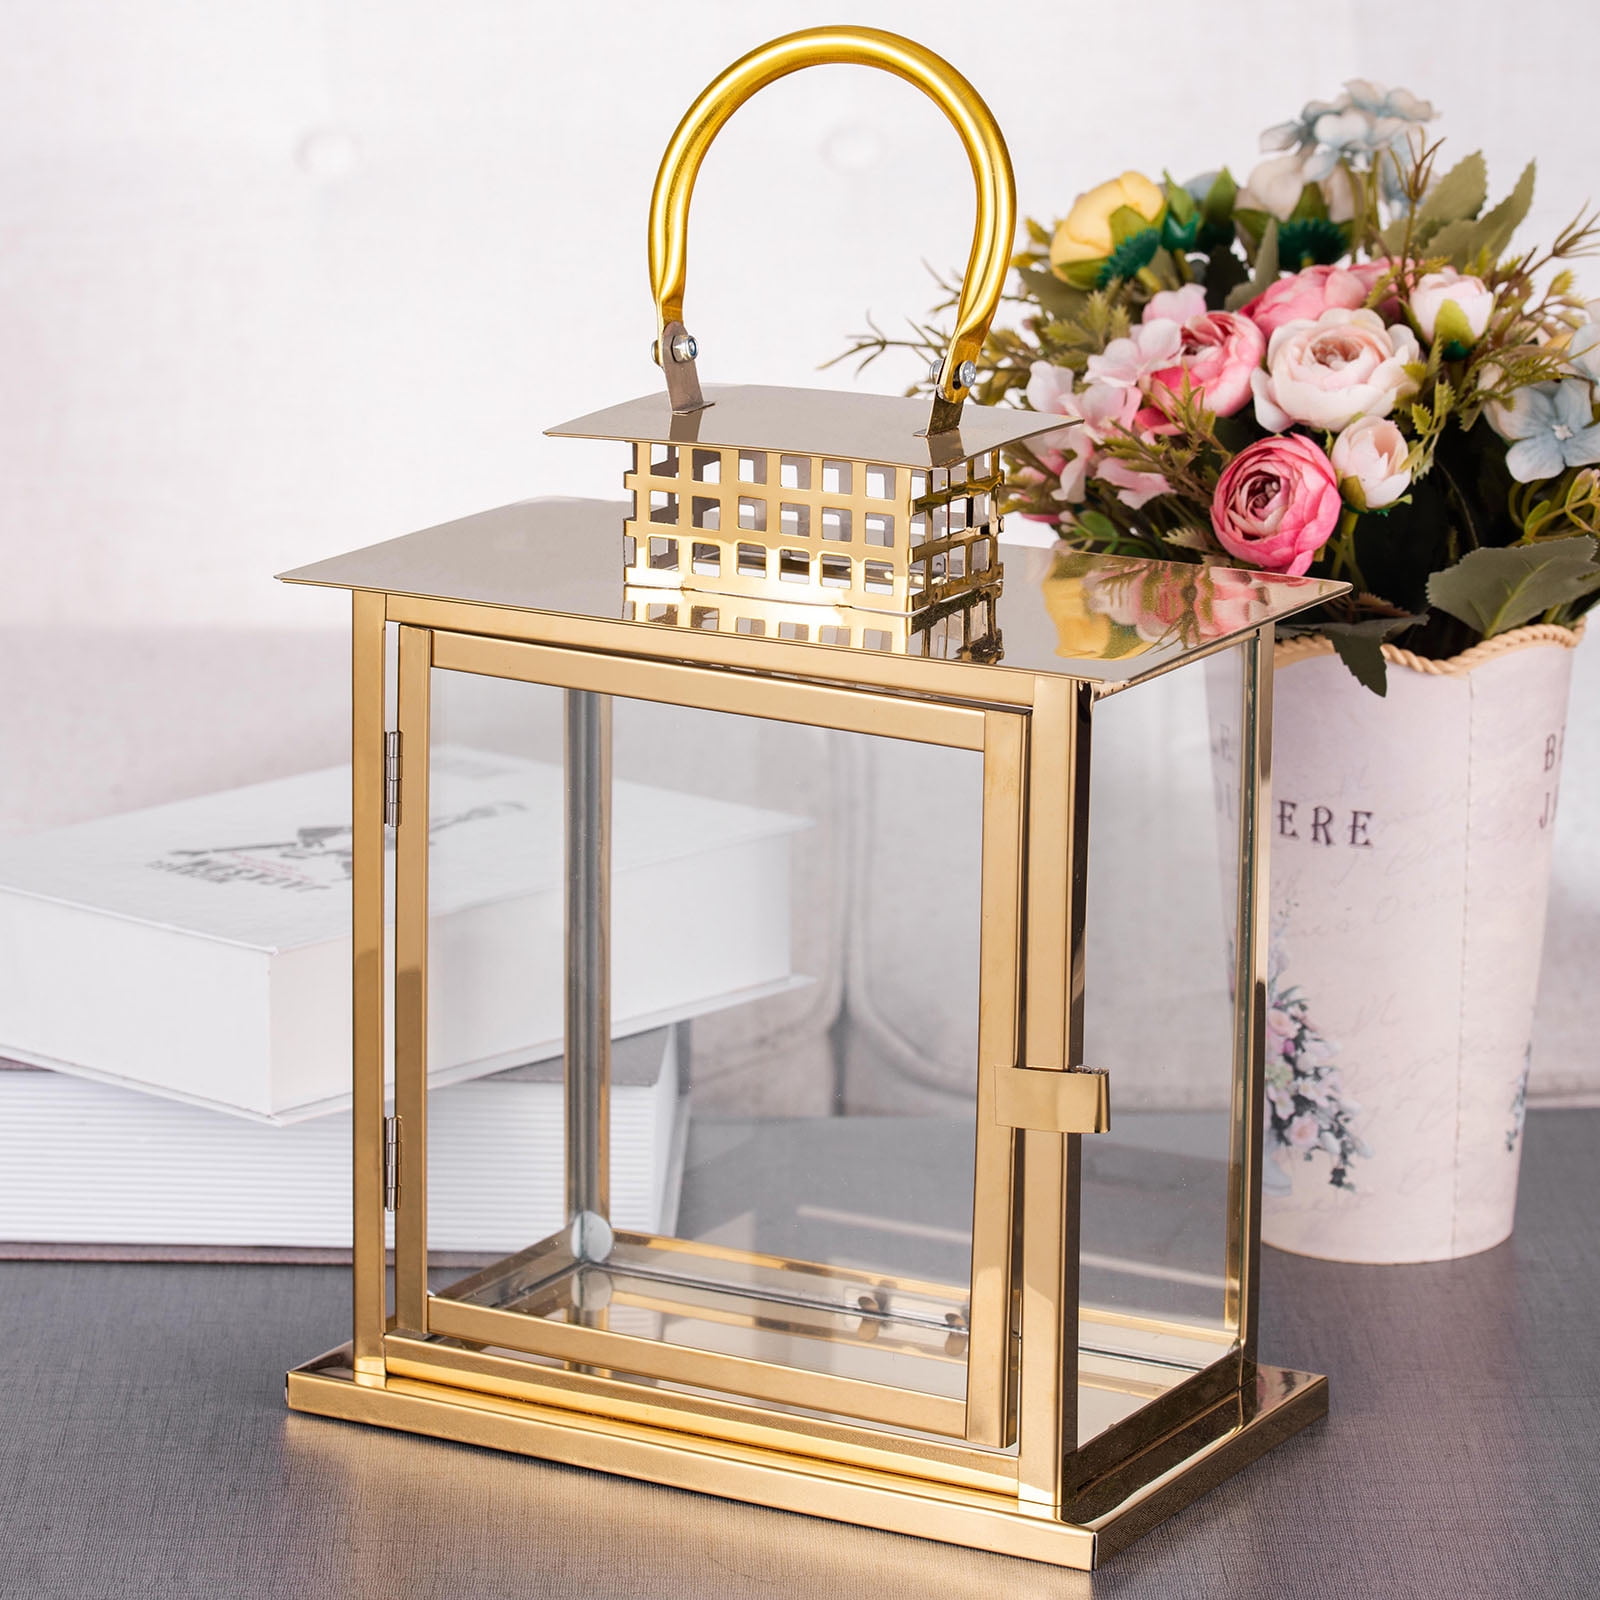 GOLD 10" tall Metal Lantern Candle Holder Party Events Wedding Home Centerpieces 